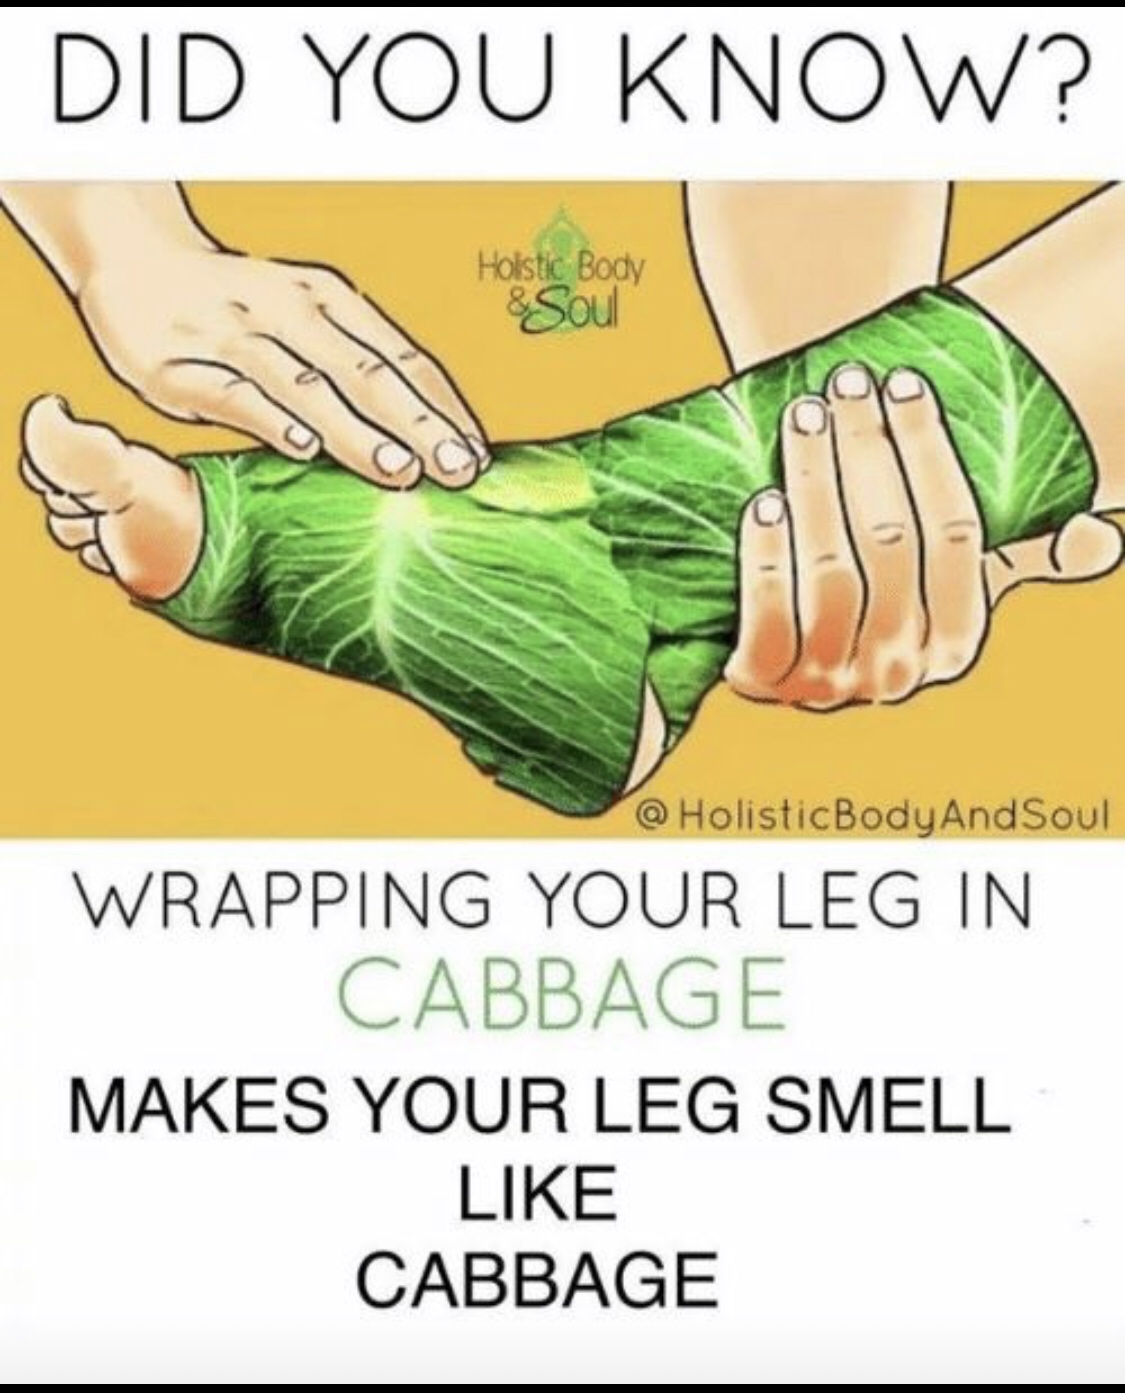 pseudoscience meme - Did You Know? Hoistic Body & Soul And Soul Wrapping Your Leg In Cabbage Makes Your Leg Smell Cabbage